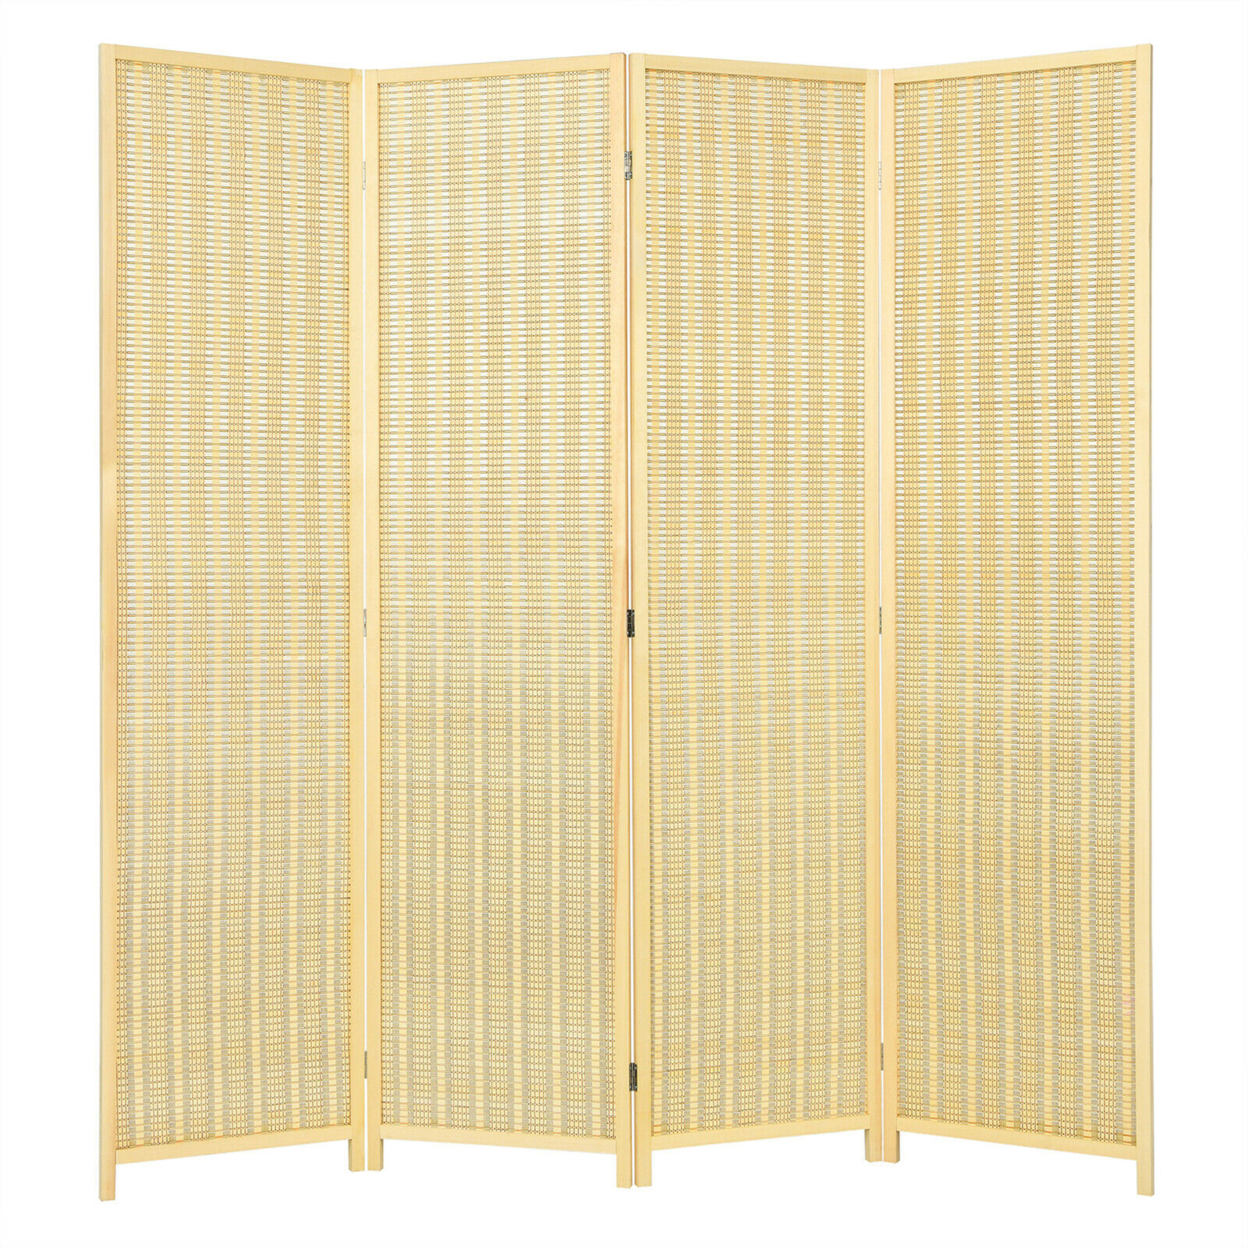 4 Panel Room Divider Screen Portable Folding 6 Ft Partition Screen